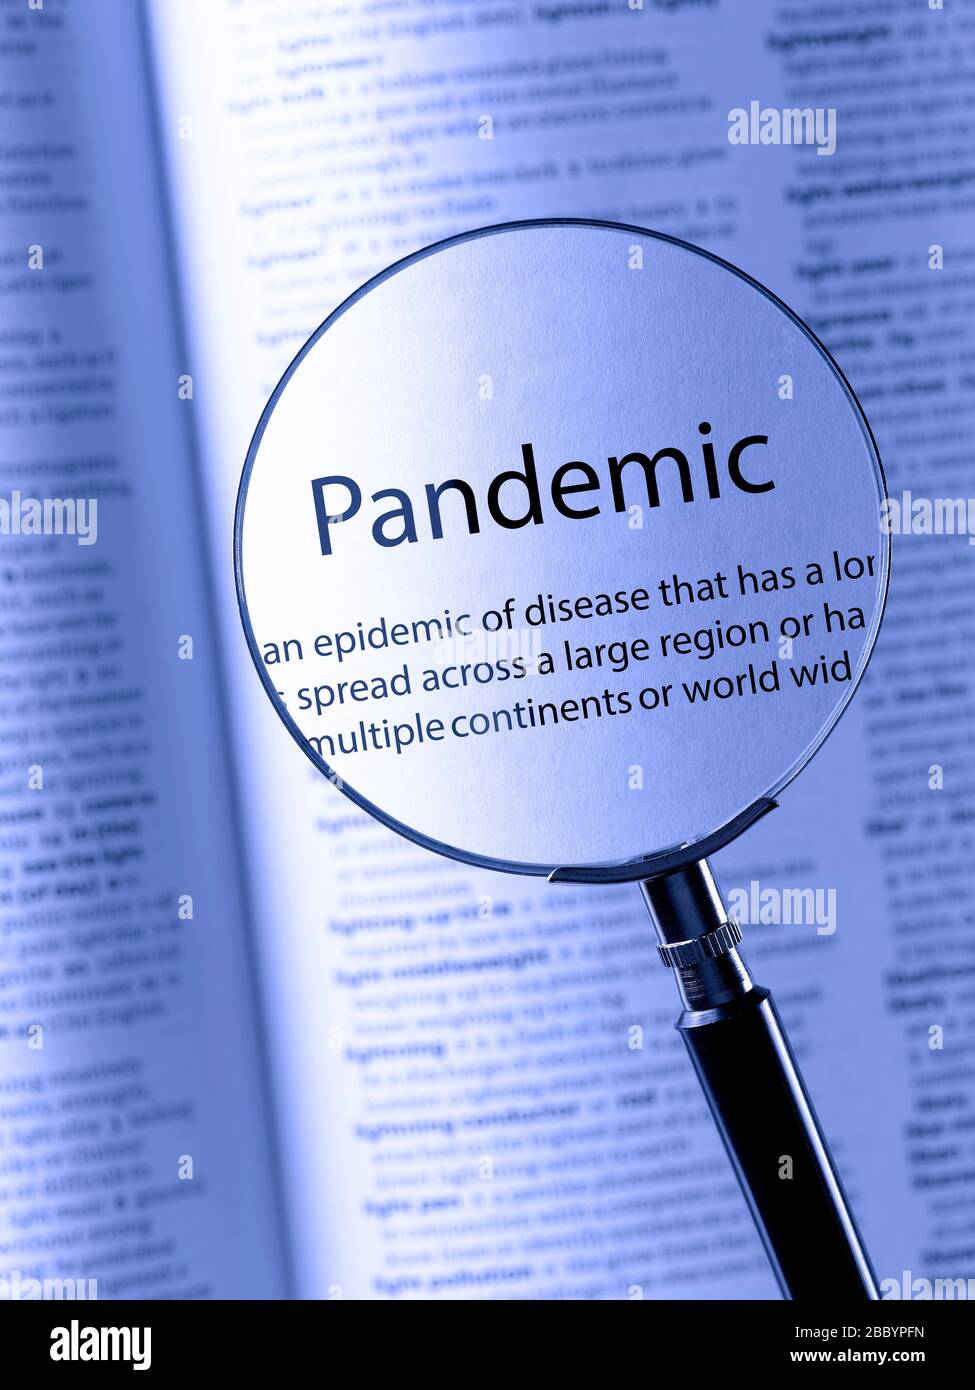 Pandemic in a dictionary Stock Photo